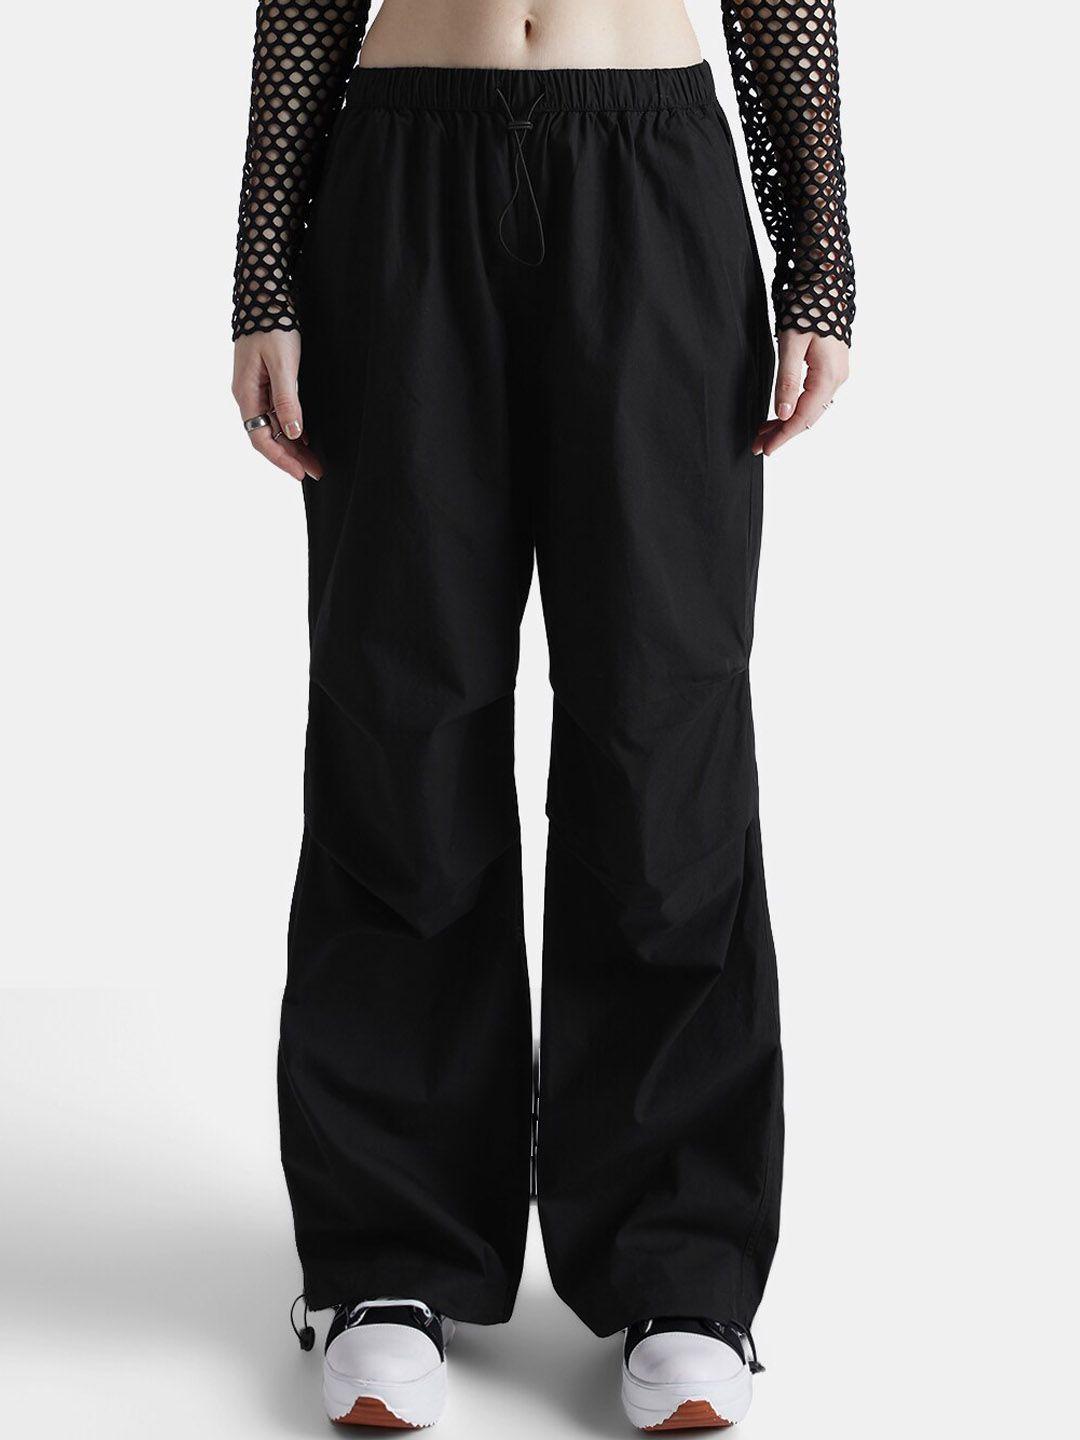 the souled store black women pure cotton loose-fit track pants